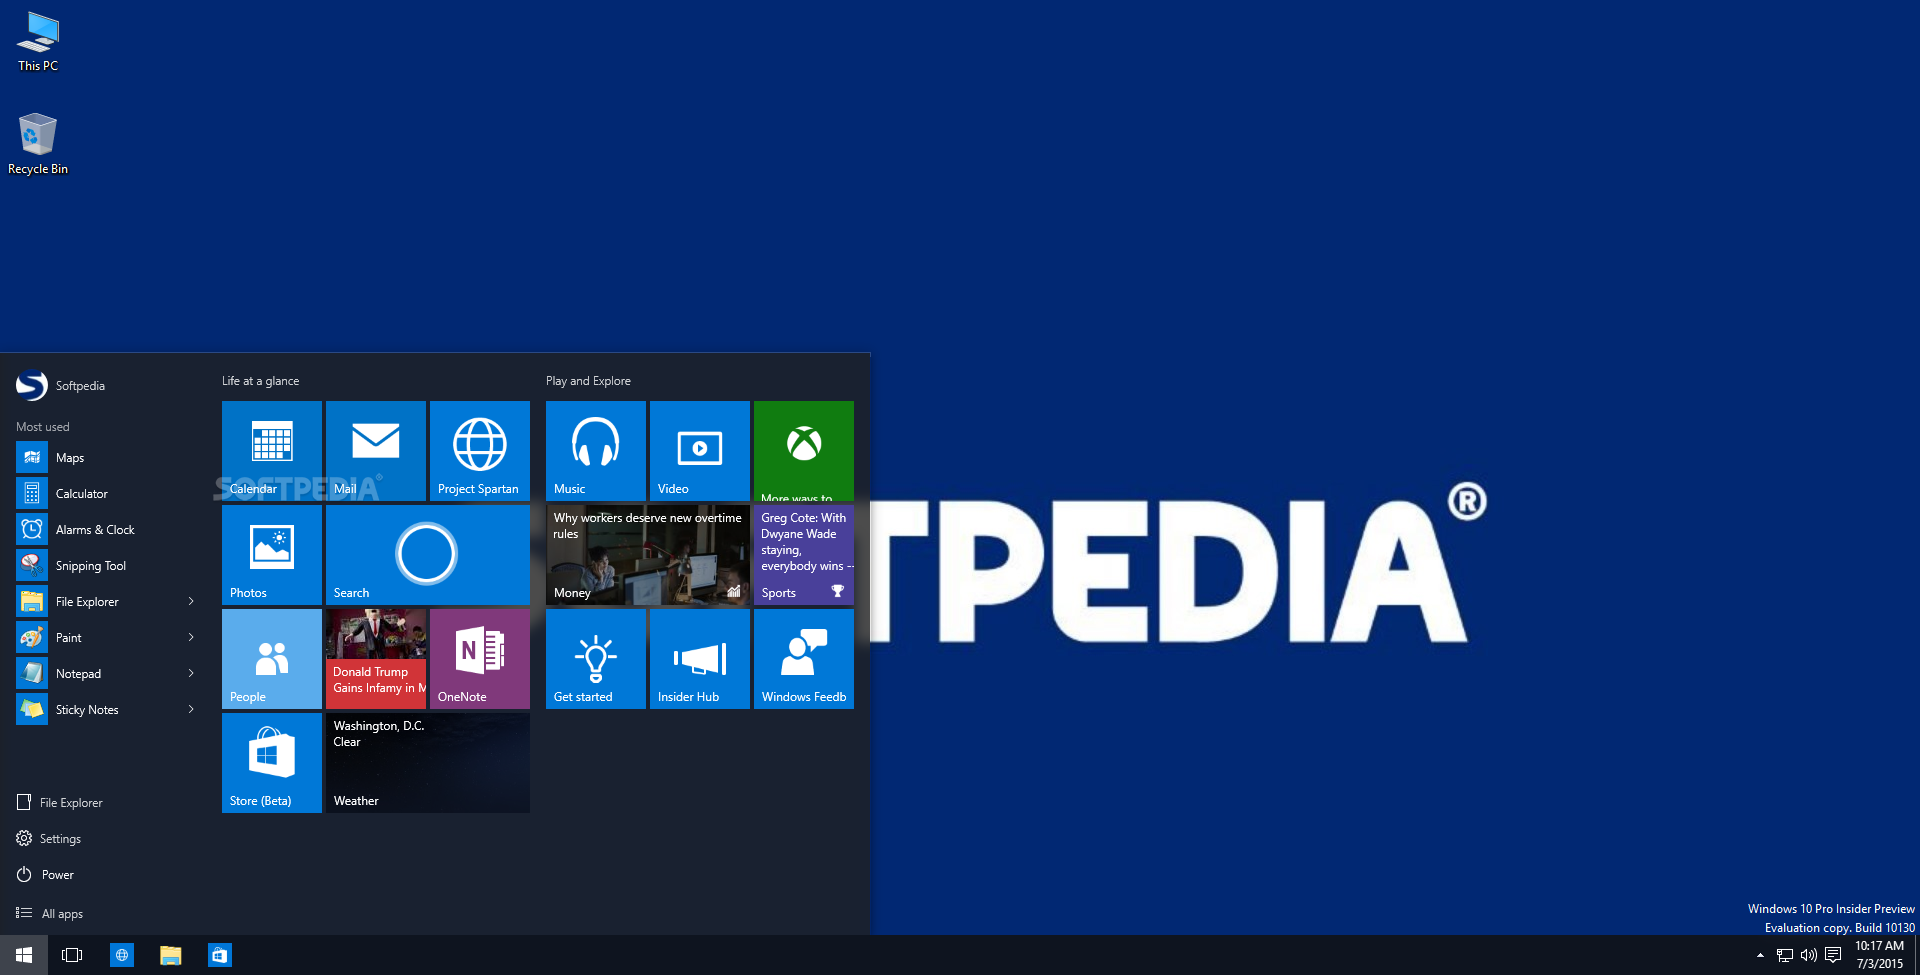 Download Windows 10 with Anniversary Update 1607 Build 14393